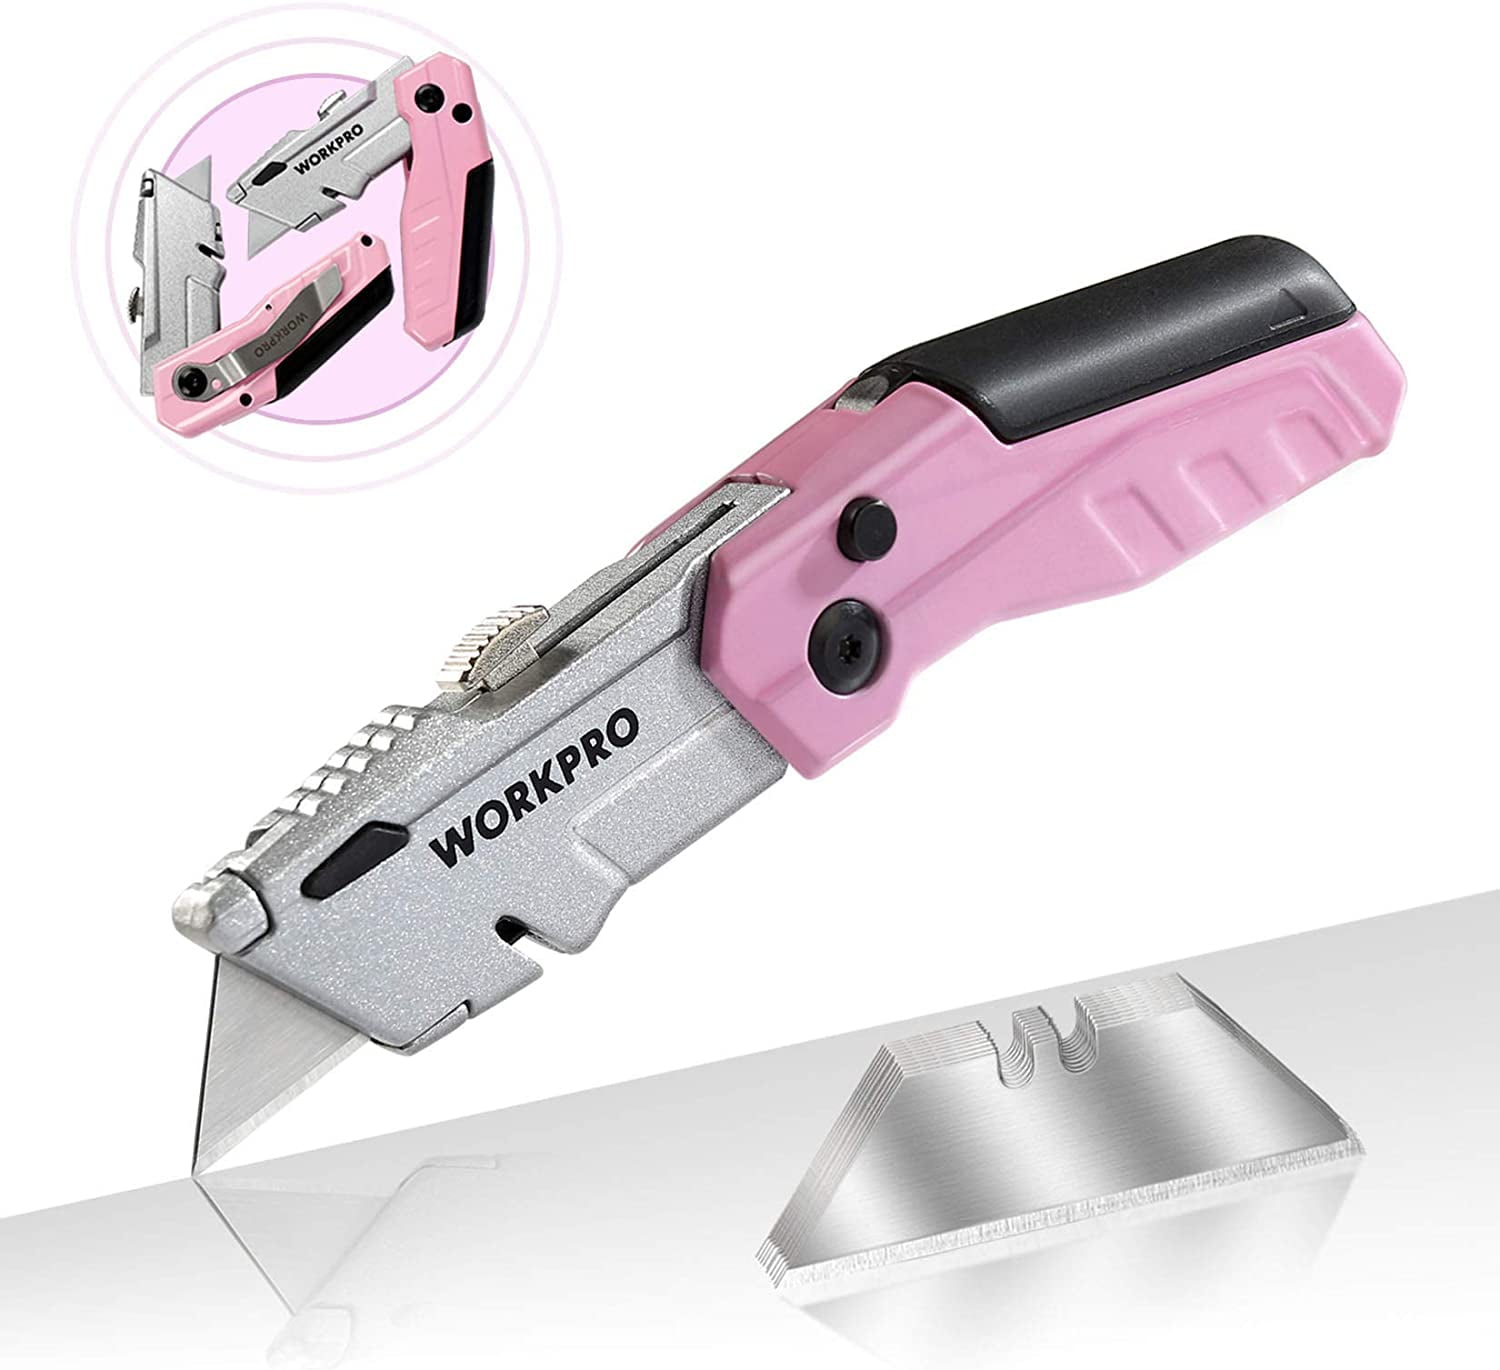 FantastiCAR Folding Utility Knife, Metal Box Cutter Body, with Safety Lock  and 5 Extra Blades (Hot Pink)